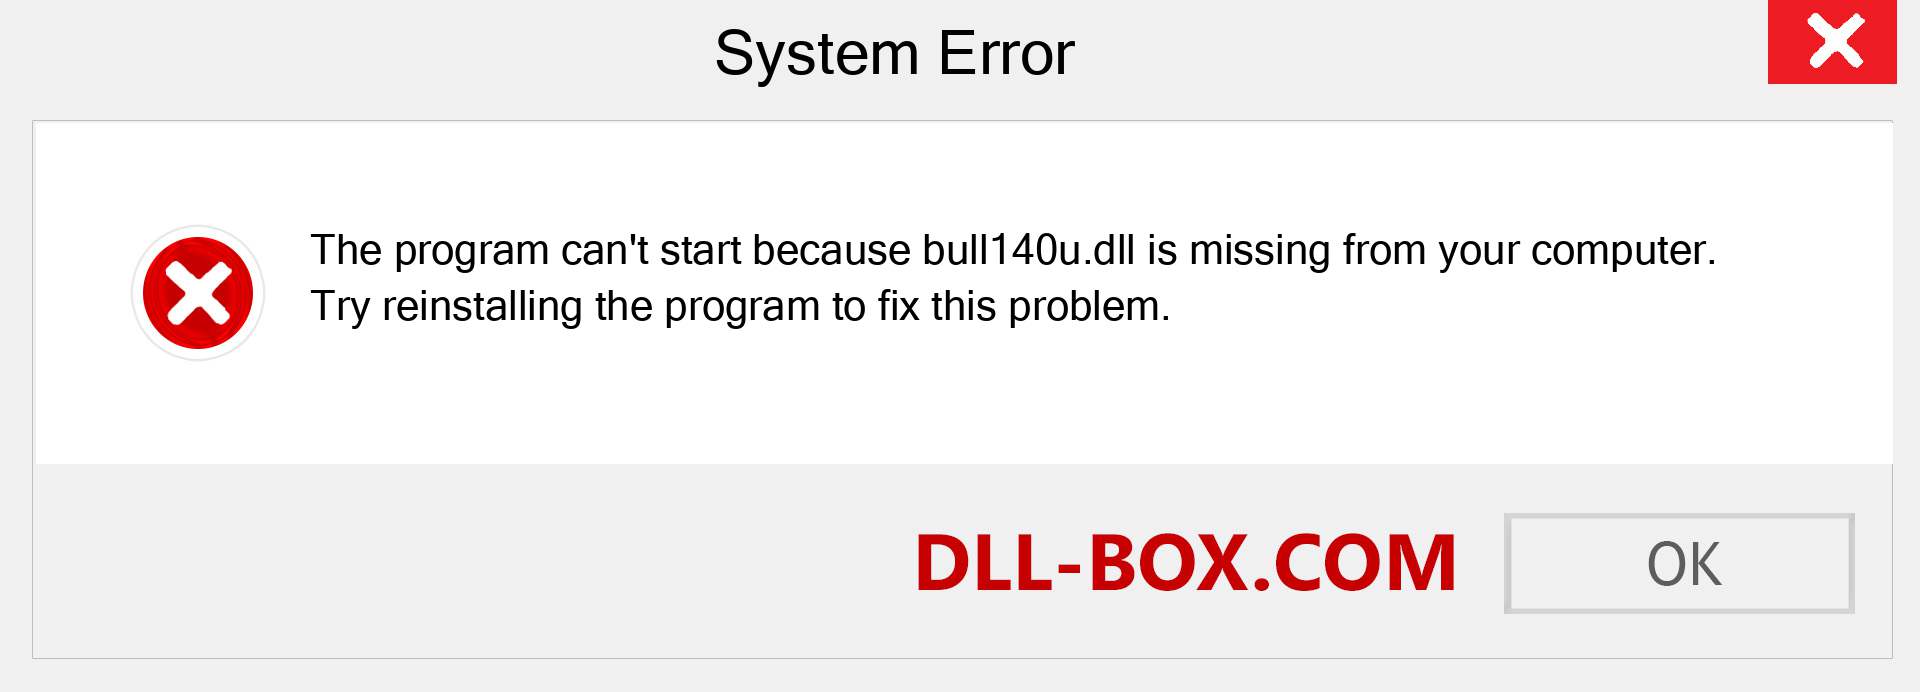  bull140u.dll file is missing?. Download for Windows 7, 8, 10 - Fix  bull140u dll Missing Error on Windows, photos, images